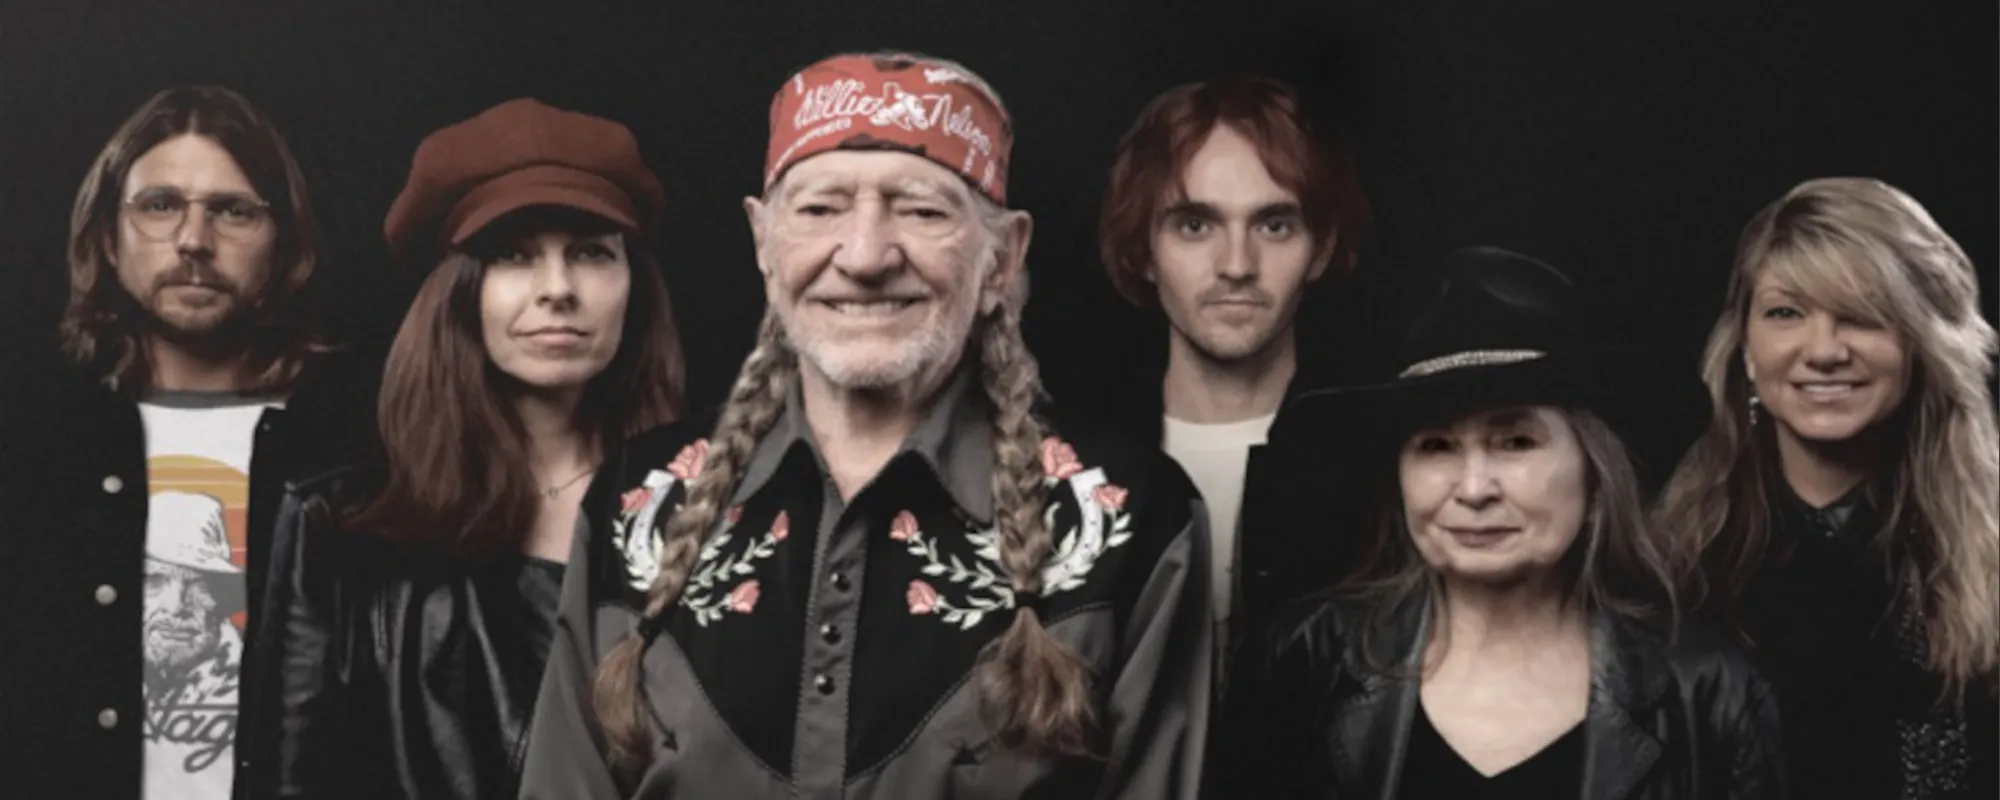 Willie Nelson Releases New LP, ‘The Willie Nelson Family’